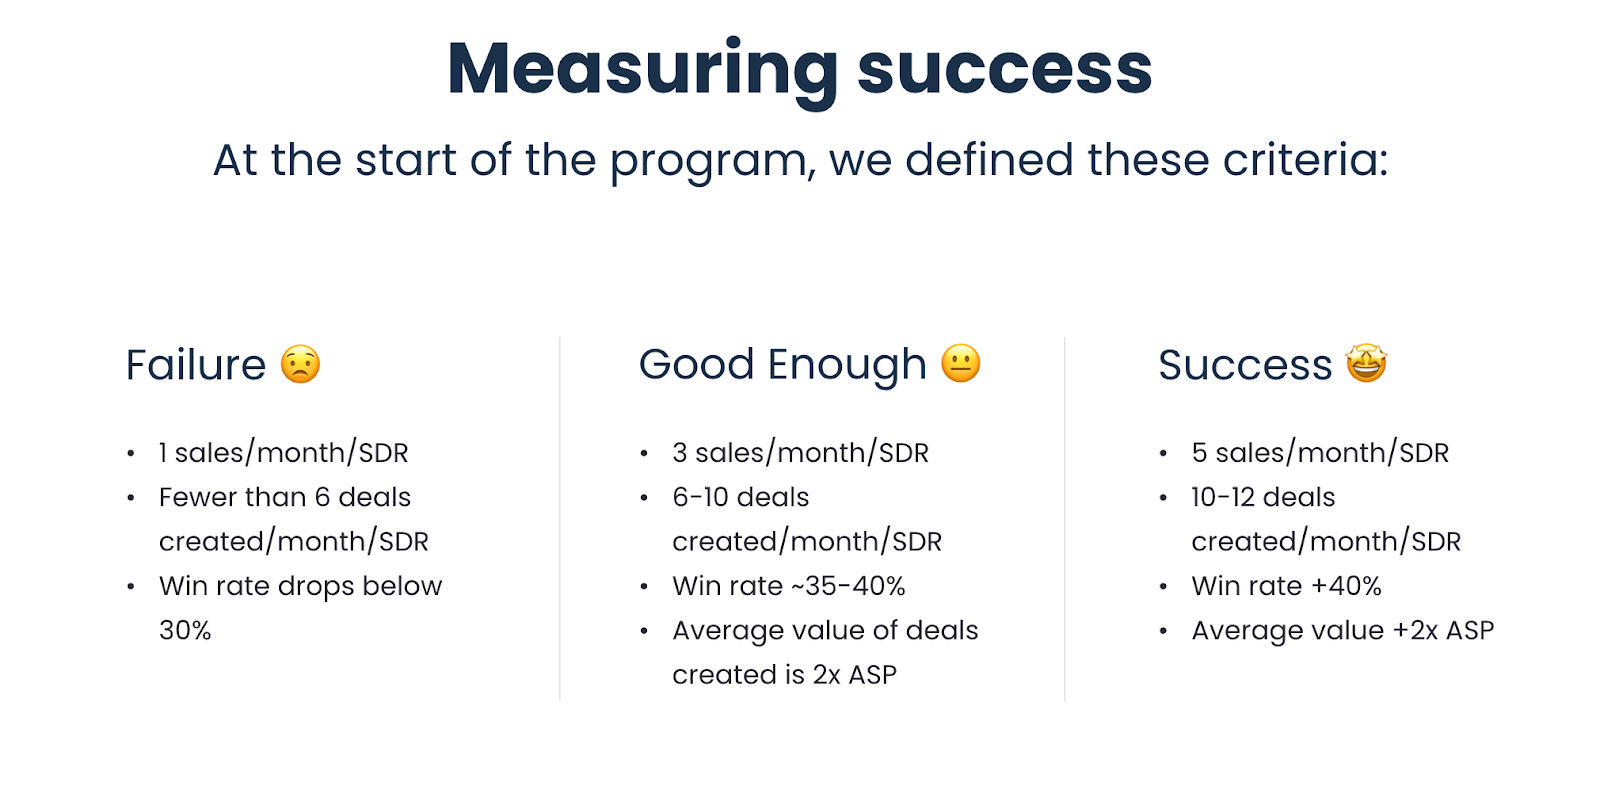 Success criteria for our outbound sales strategy.